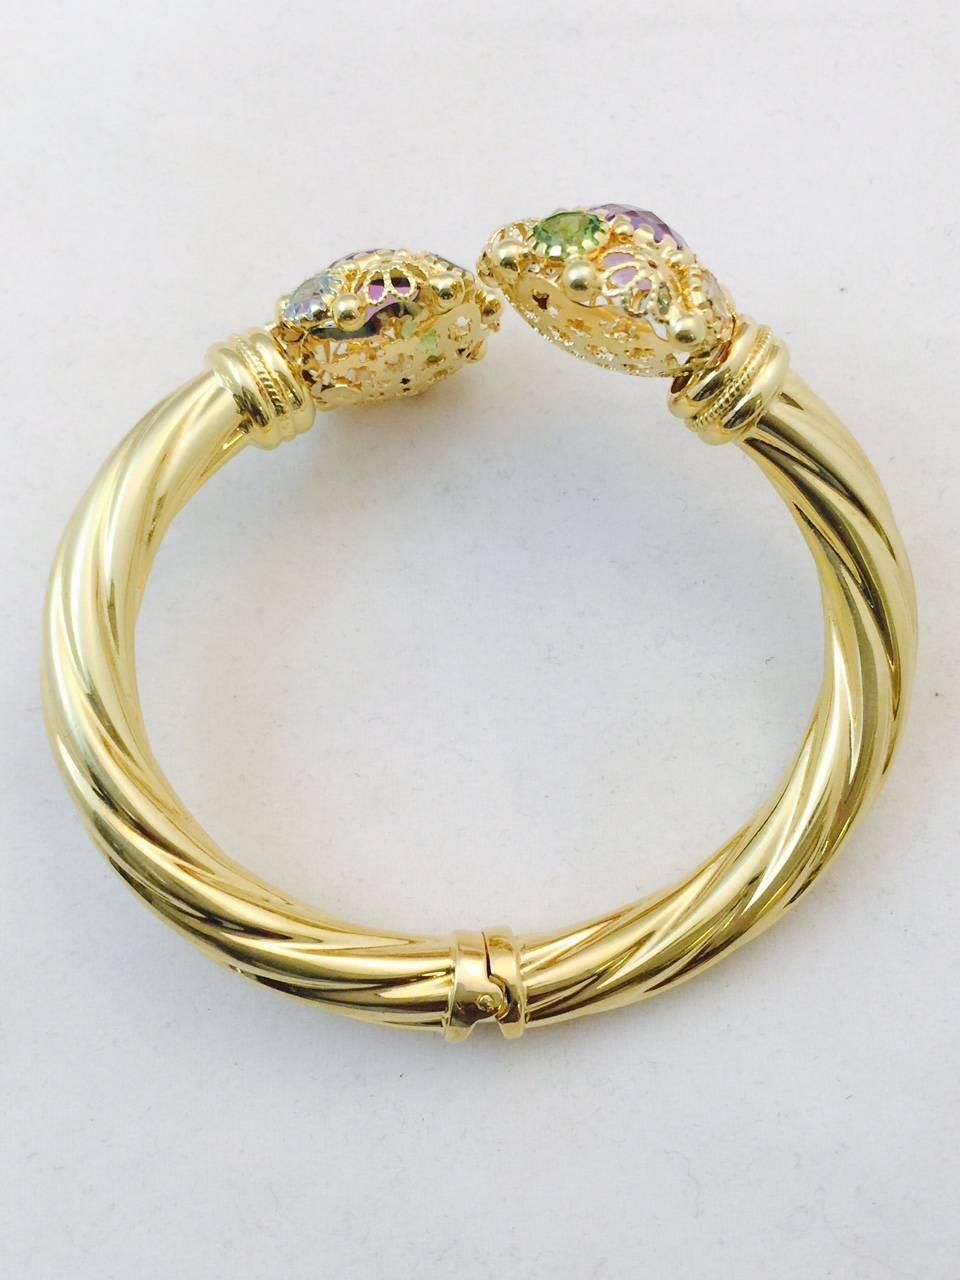 Meticulously crafted in 18 karat yellow gold, this fabulous by-pass design hinged bangle bracelet is certain to please the most discerning fine jewelry lover!  Each bangle end boasts a circle with fancy open gold work and perfectly matched pie crust